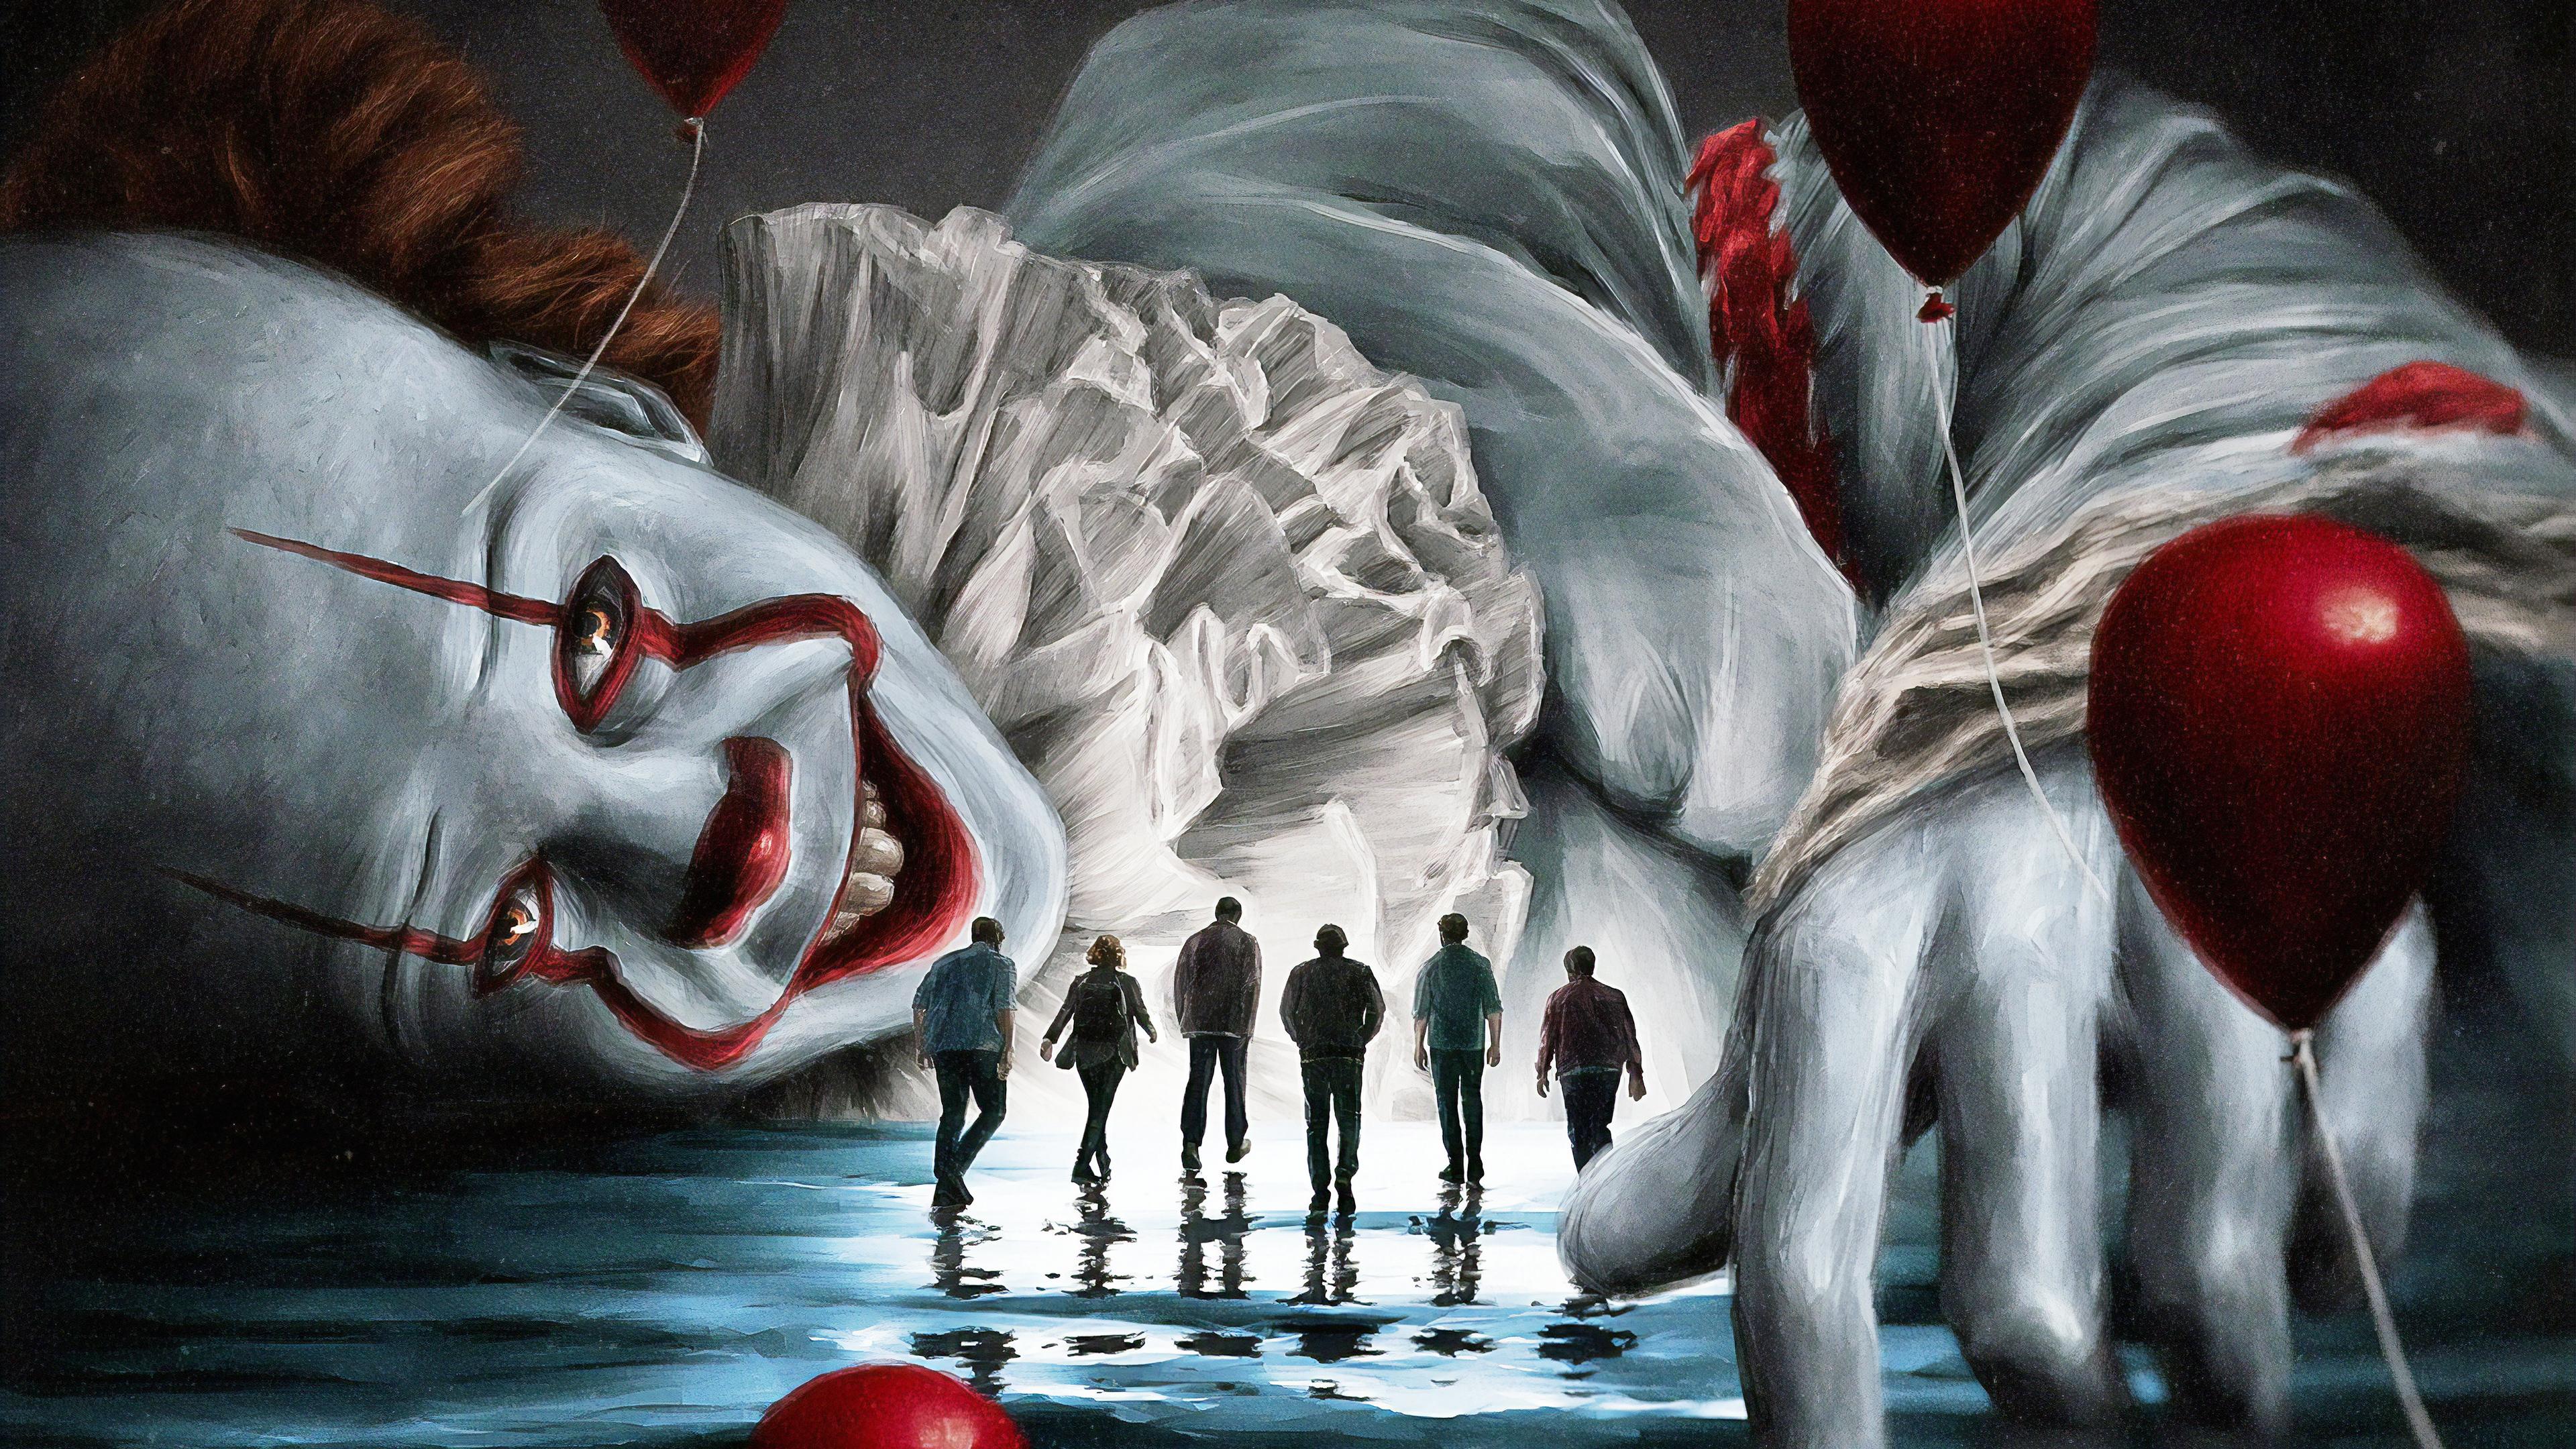 It Chapter Two 4k Ultra HD Wallpaper. Background Imagex2160